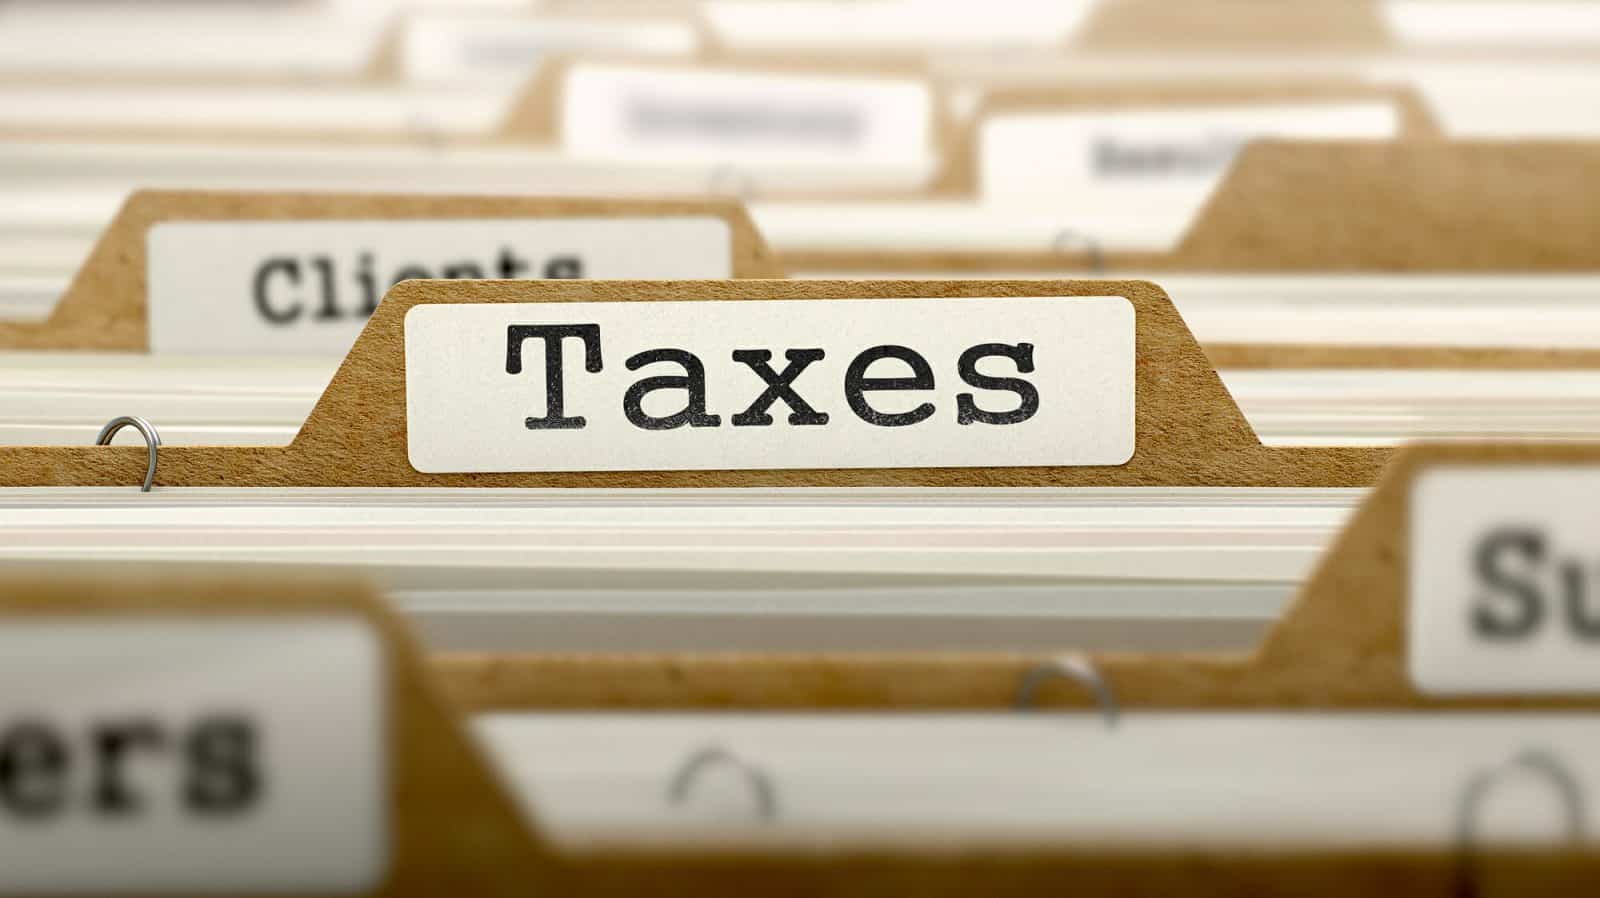 What Are Tax Organizers, and Why Are They Risky When Filing Your Tax Return?